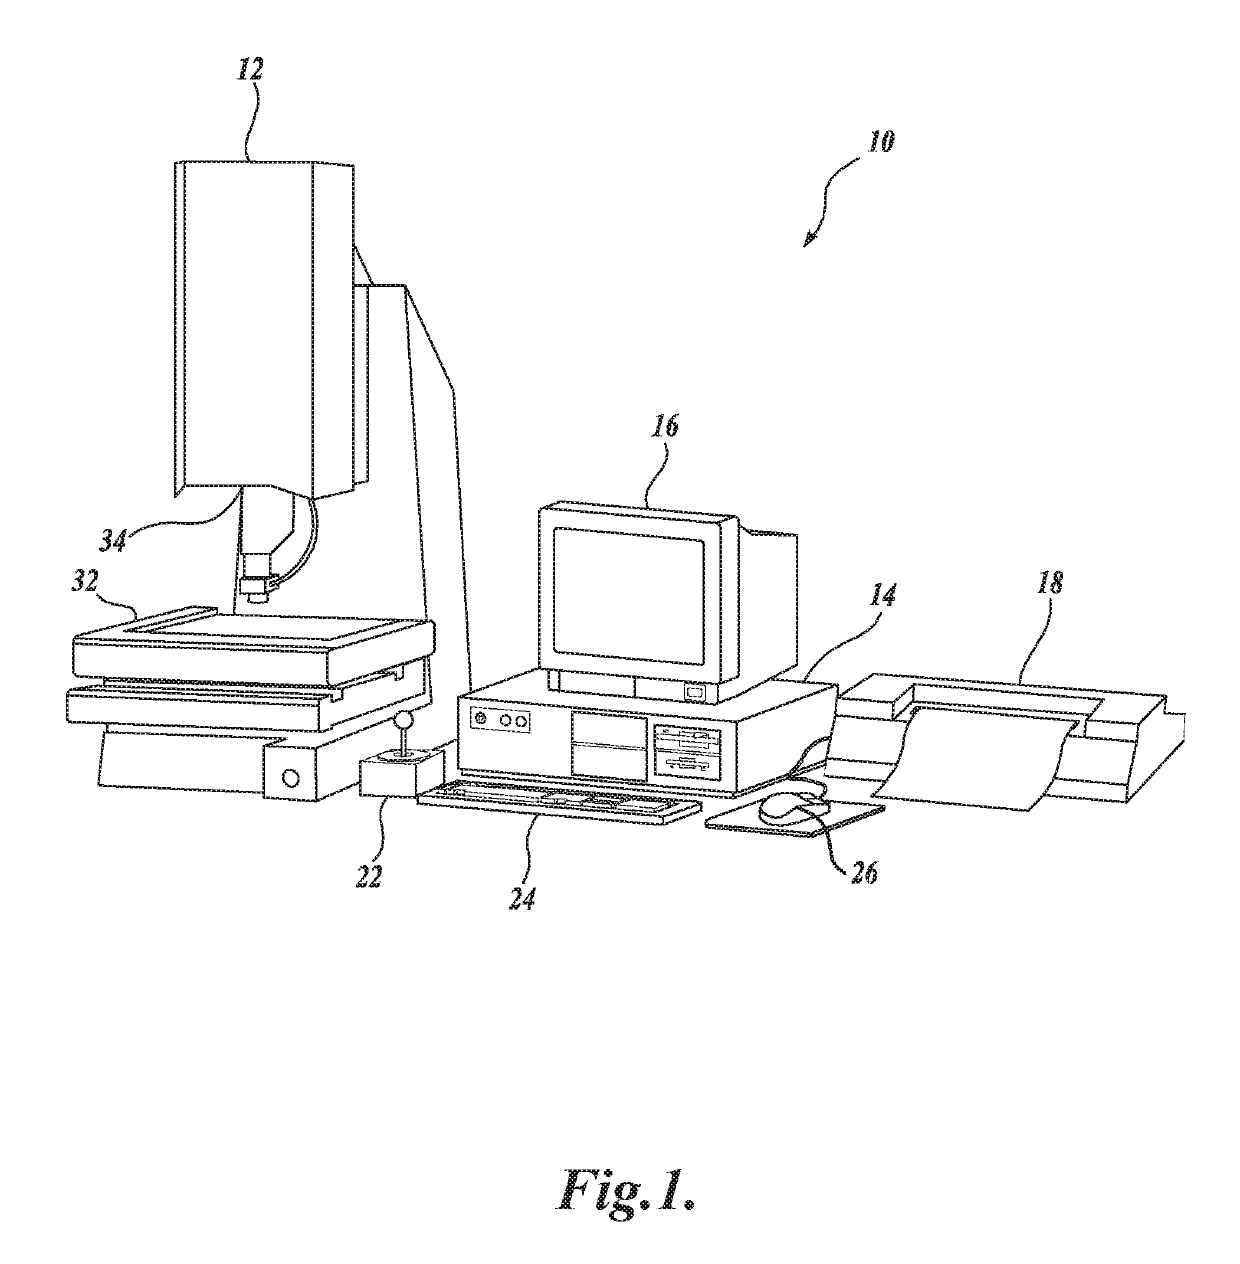 Variable focal length lens system with optical power monitoring